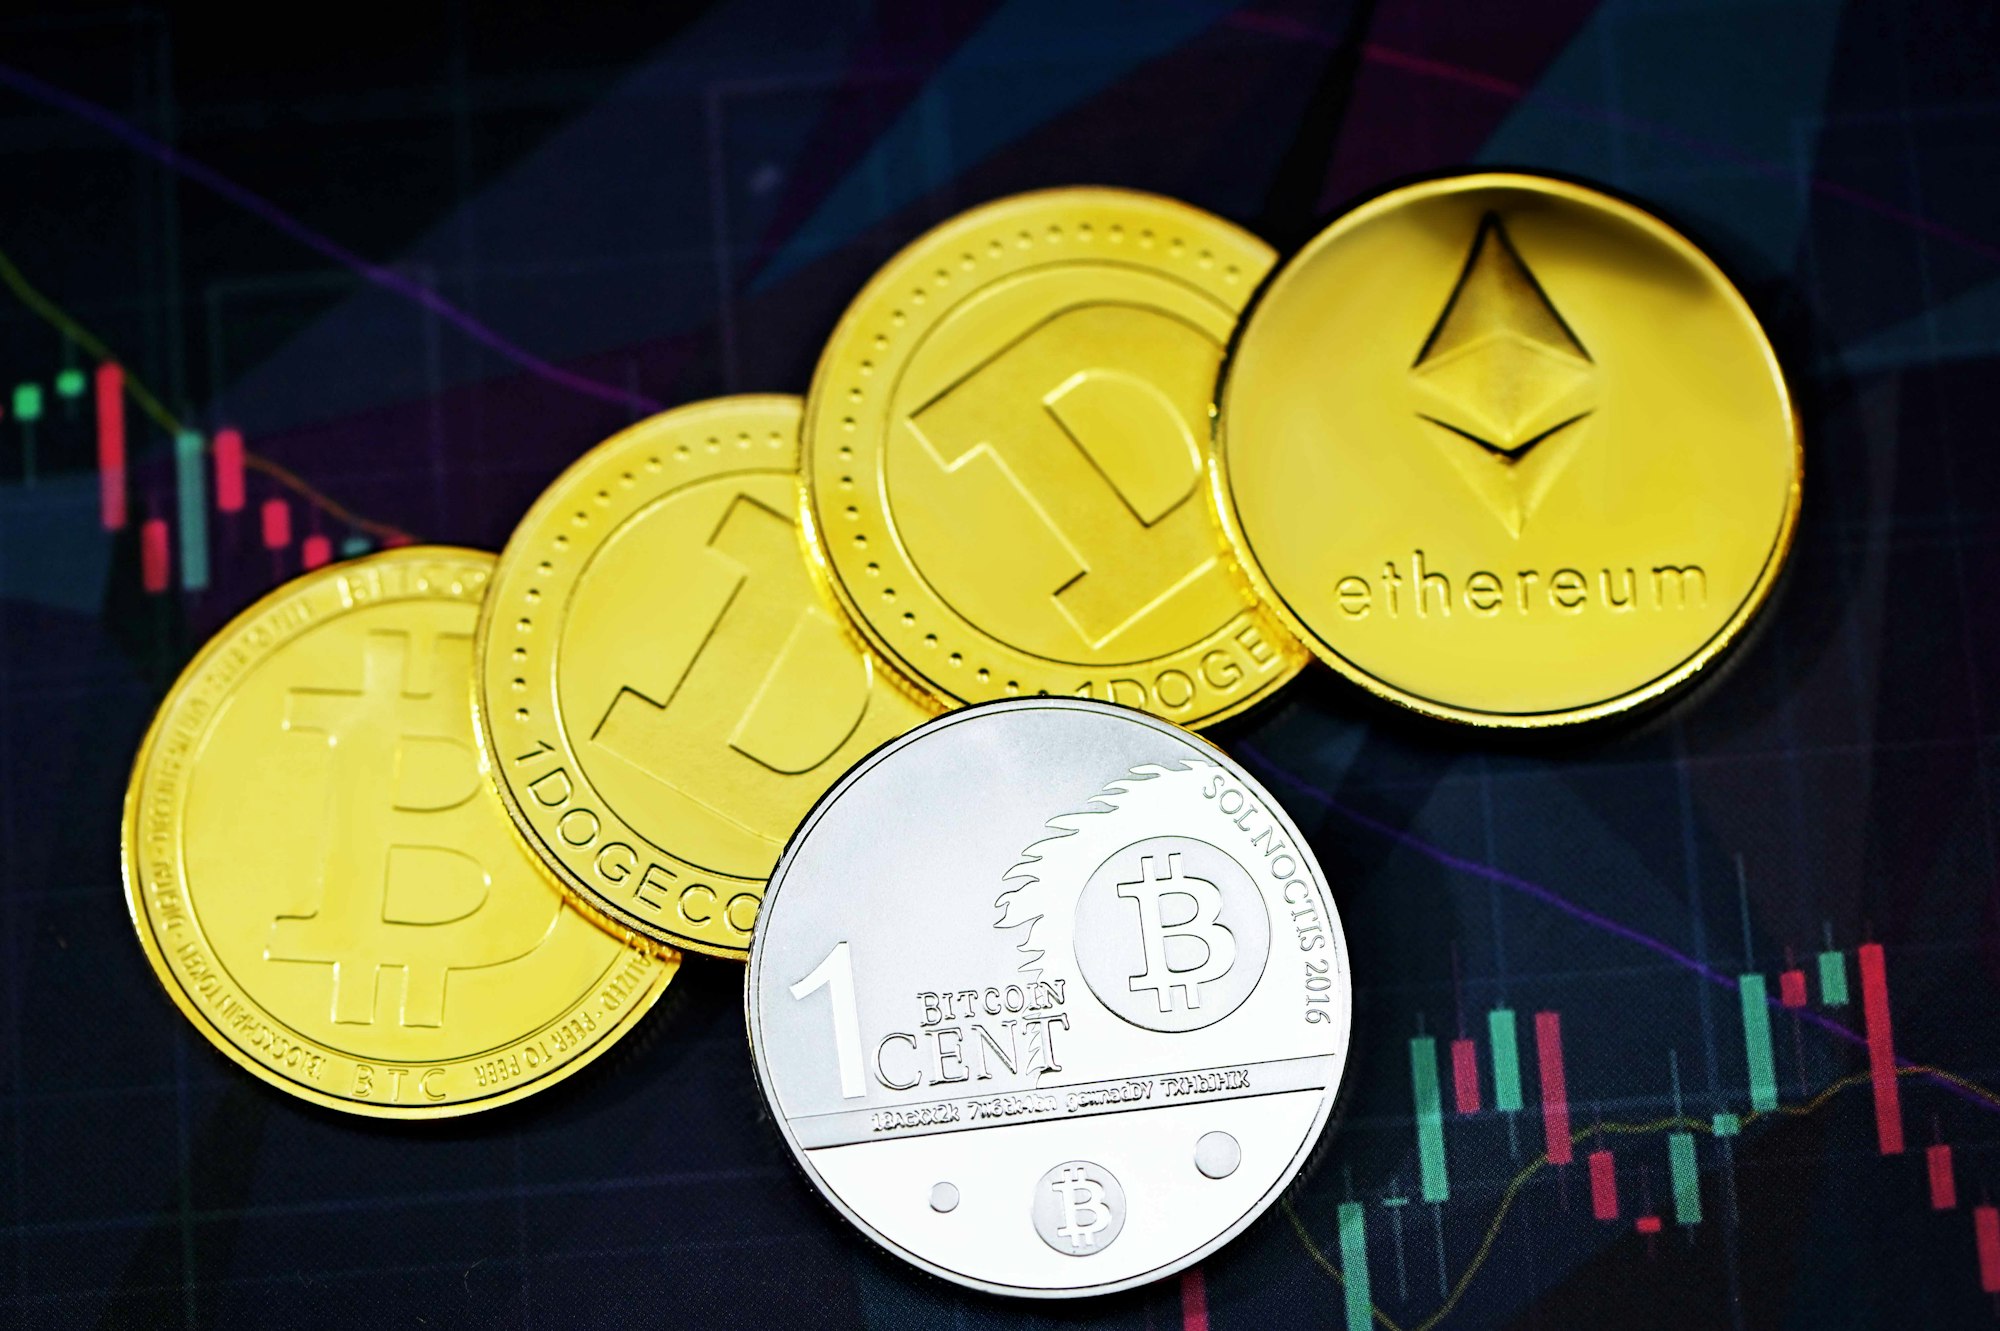 Diverse cryptocurrencies on top of trading chart